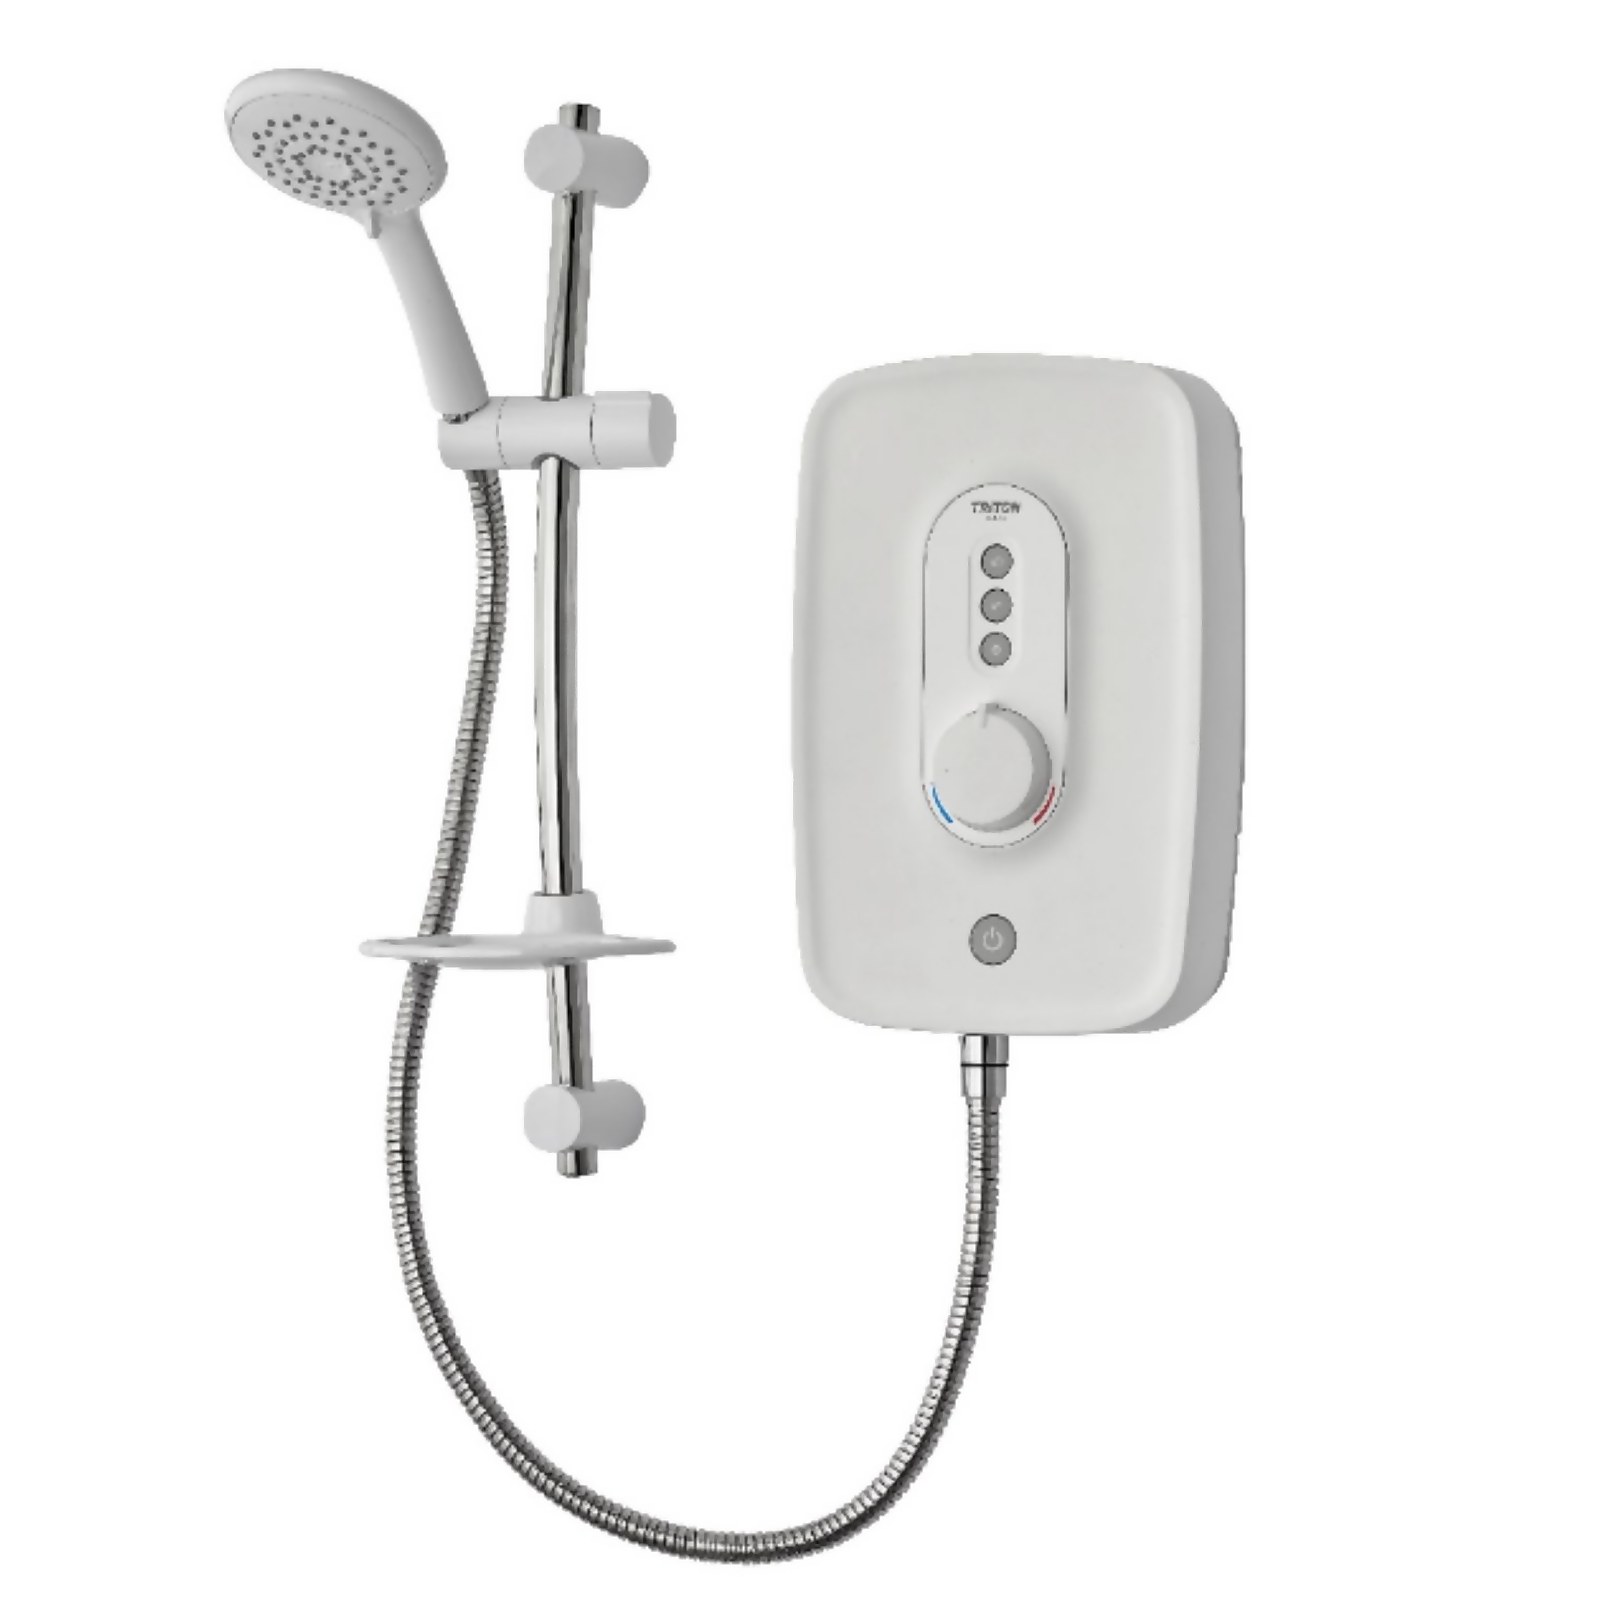 Photo of Triton Opal 4 9.5kw Electric Shower - White